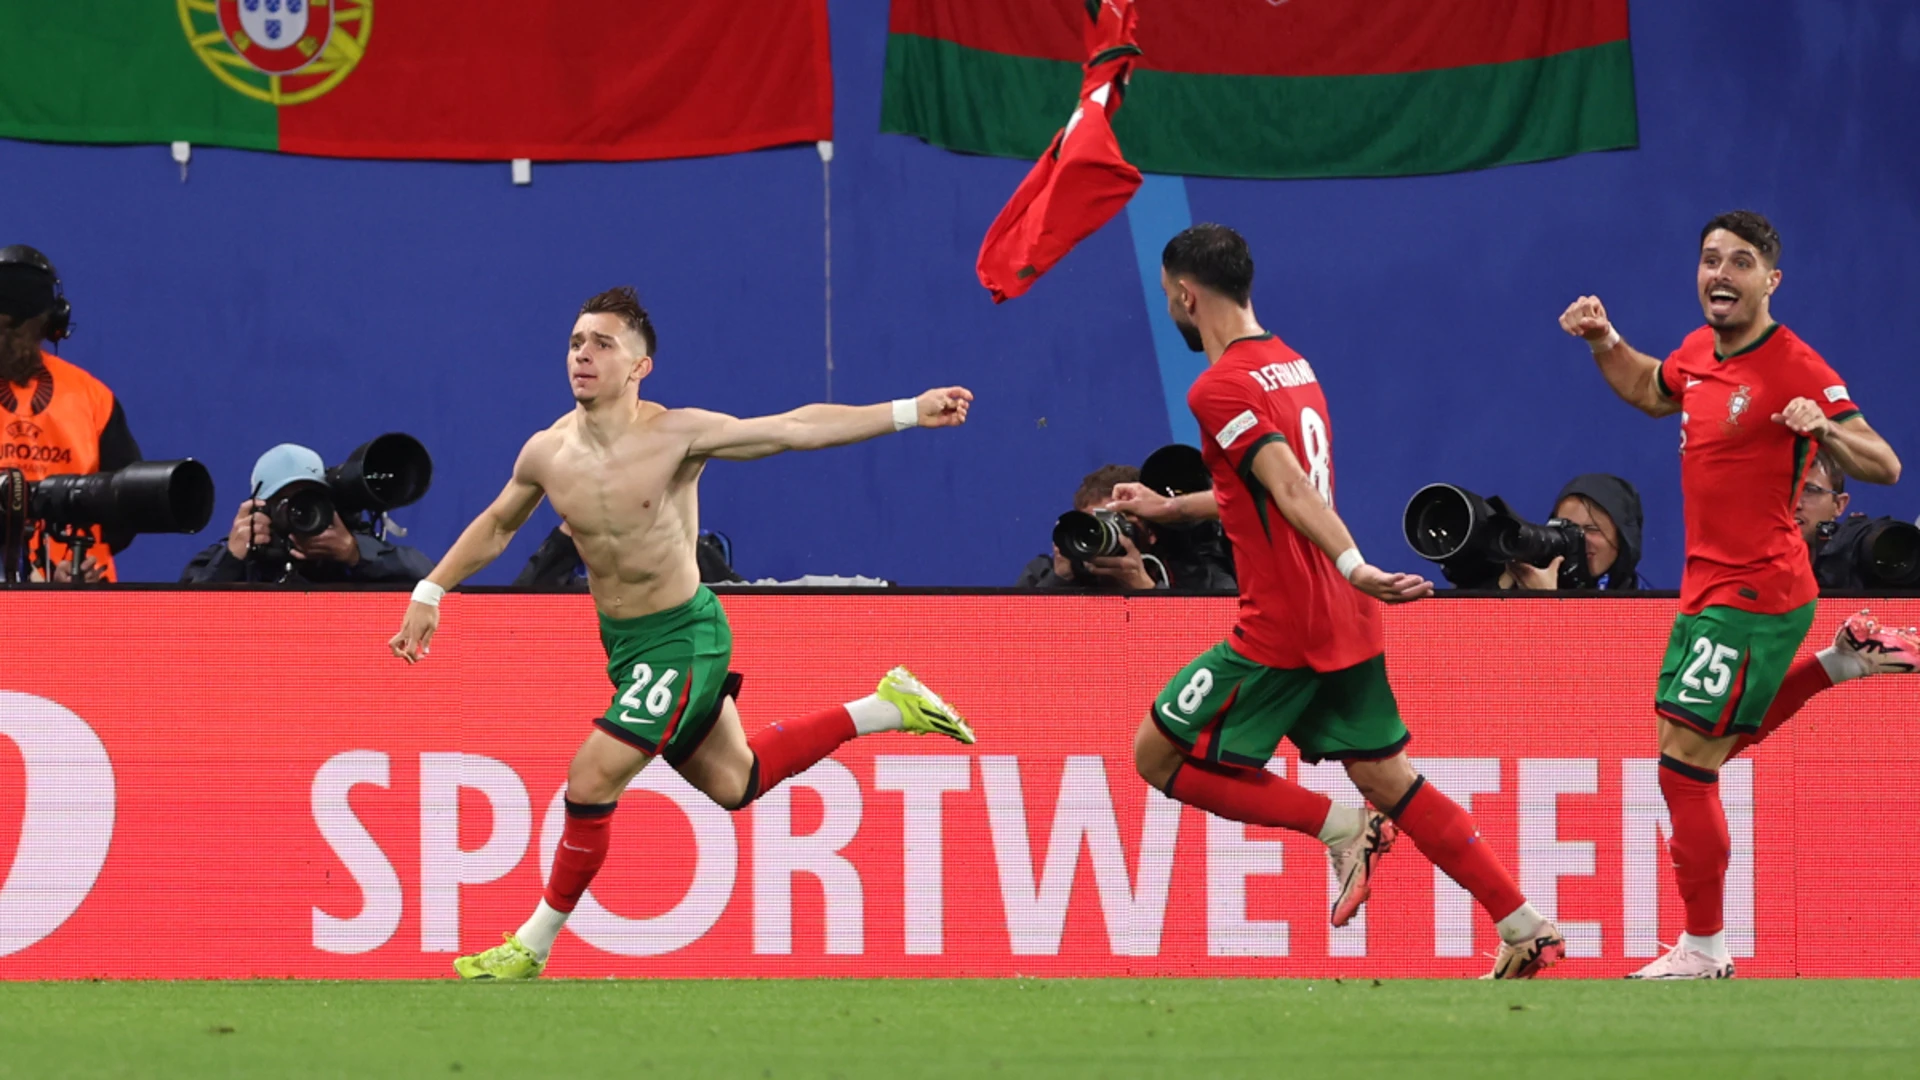 Conceicao snatches Portugal comeback win over Czechs